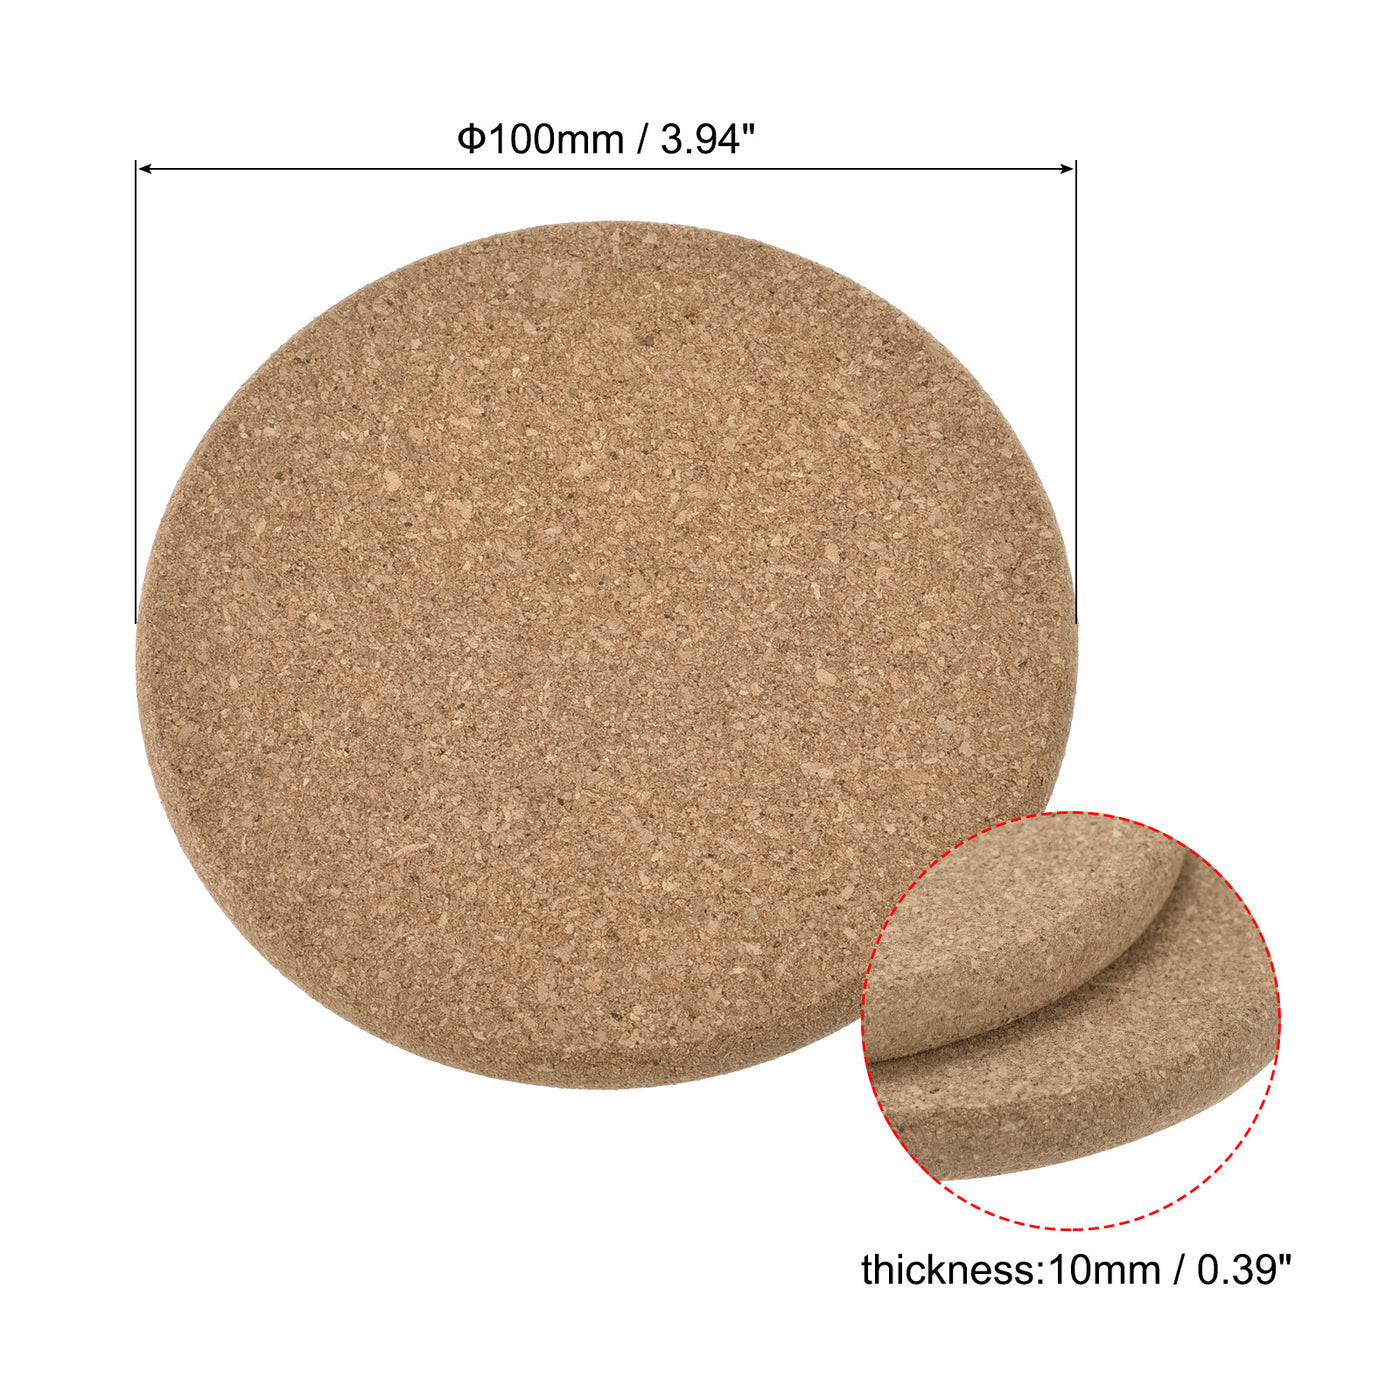 uxcell Uxcell 100mm(3.94") Round Coasters 10mm Thick Cork Cup Mat Pad Round Edge 12pcs